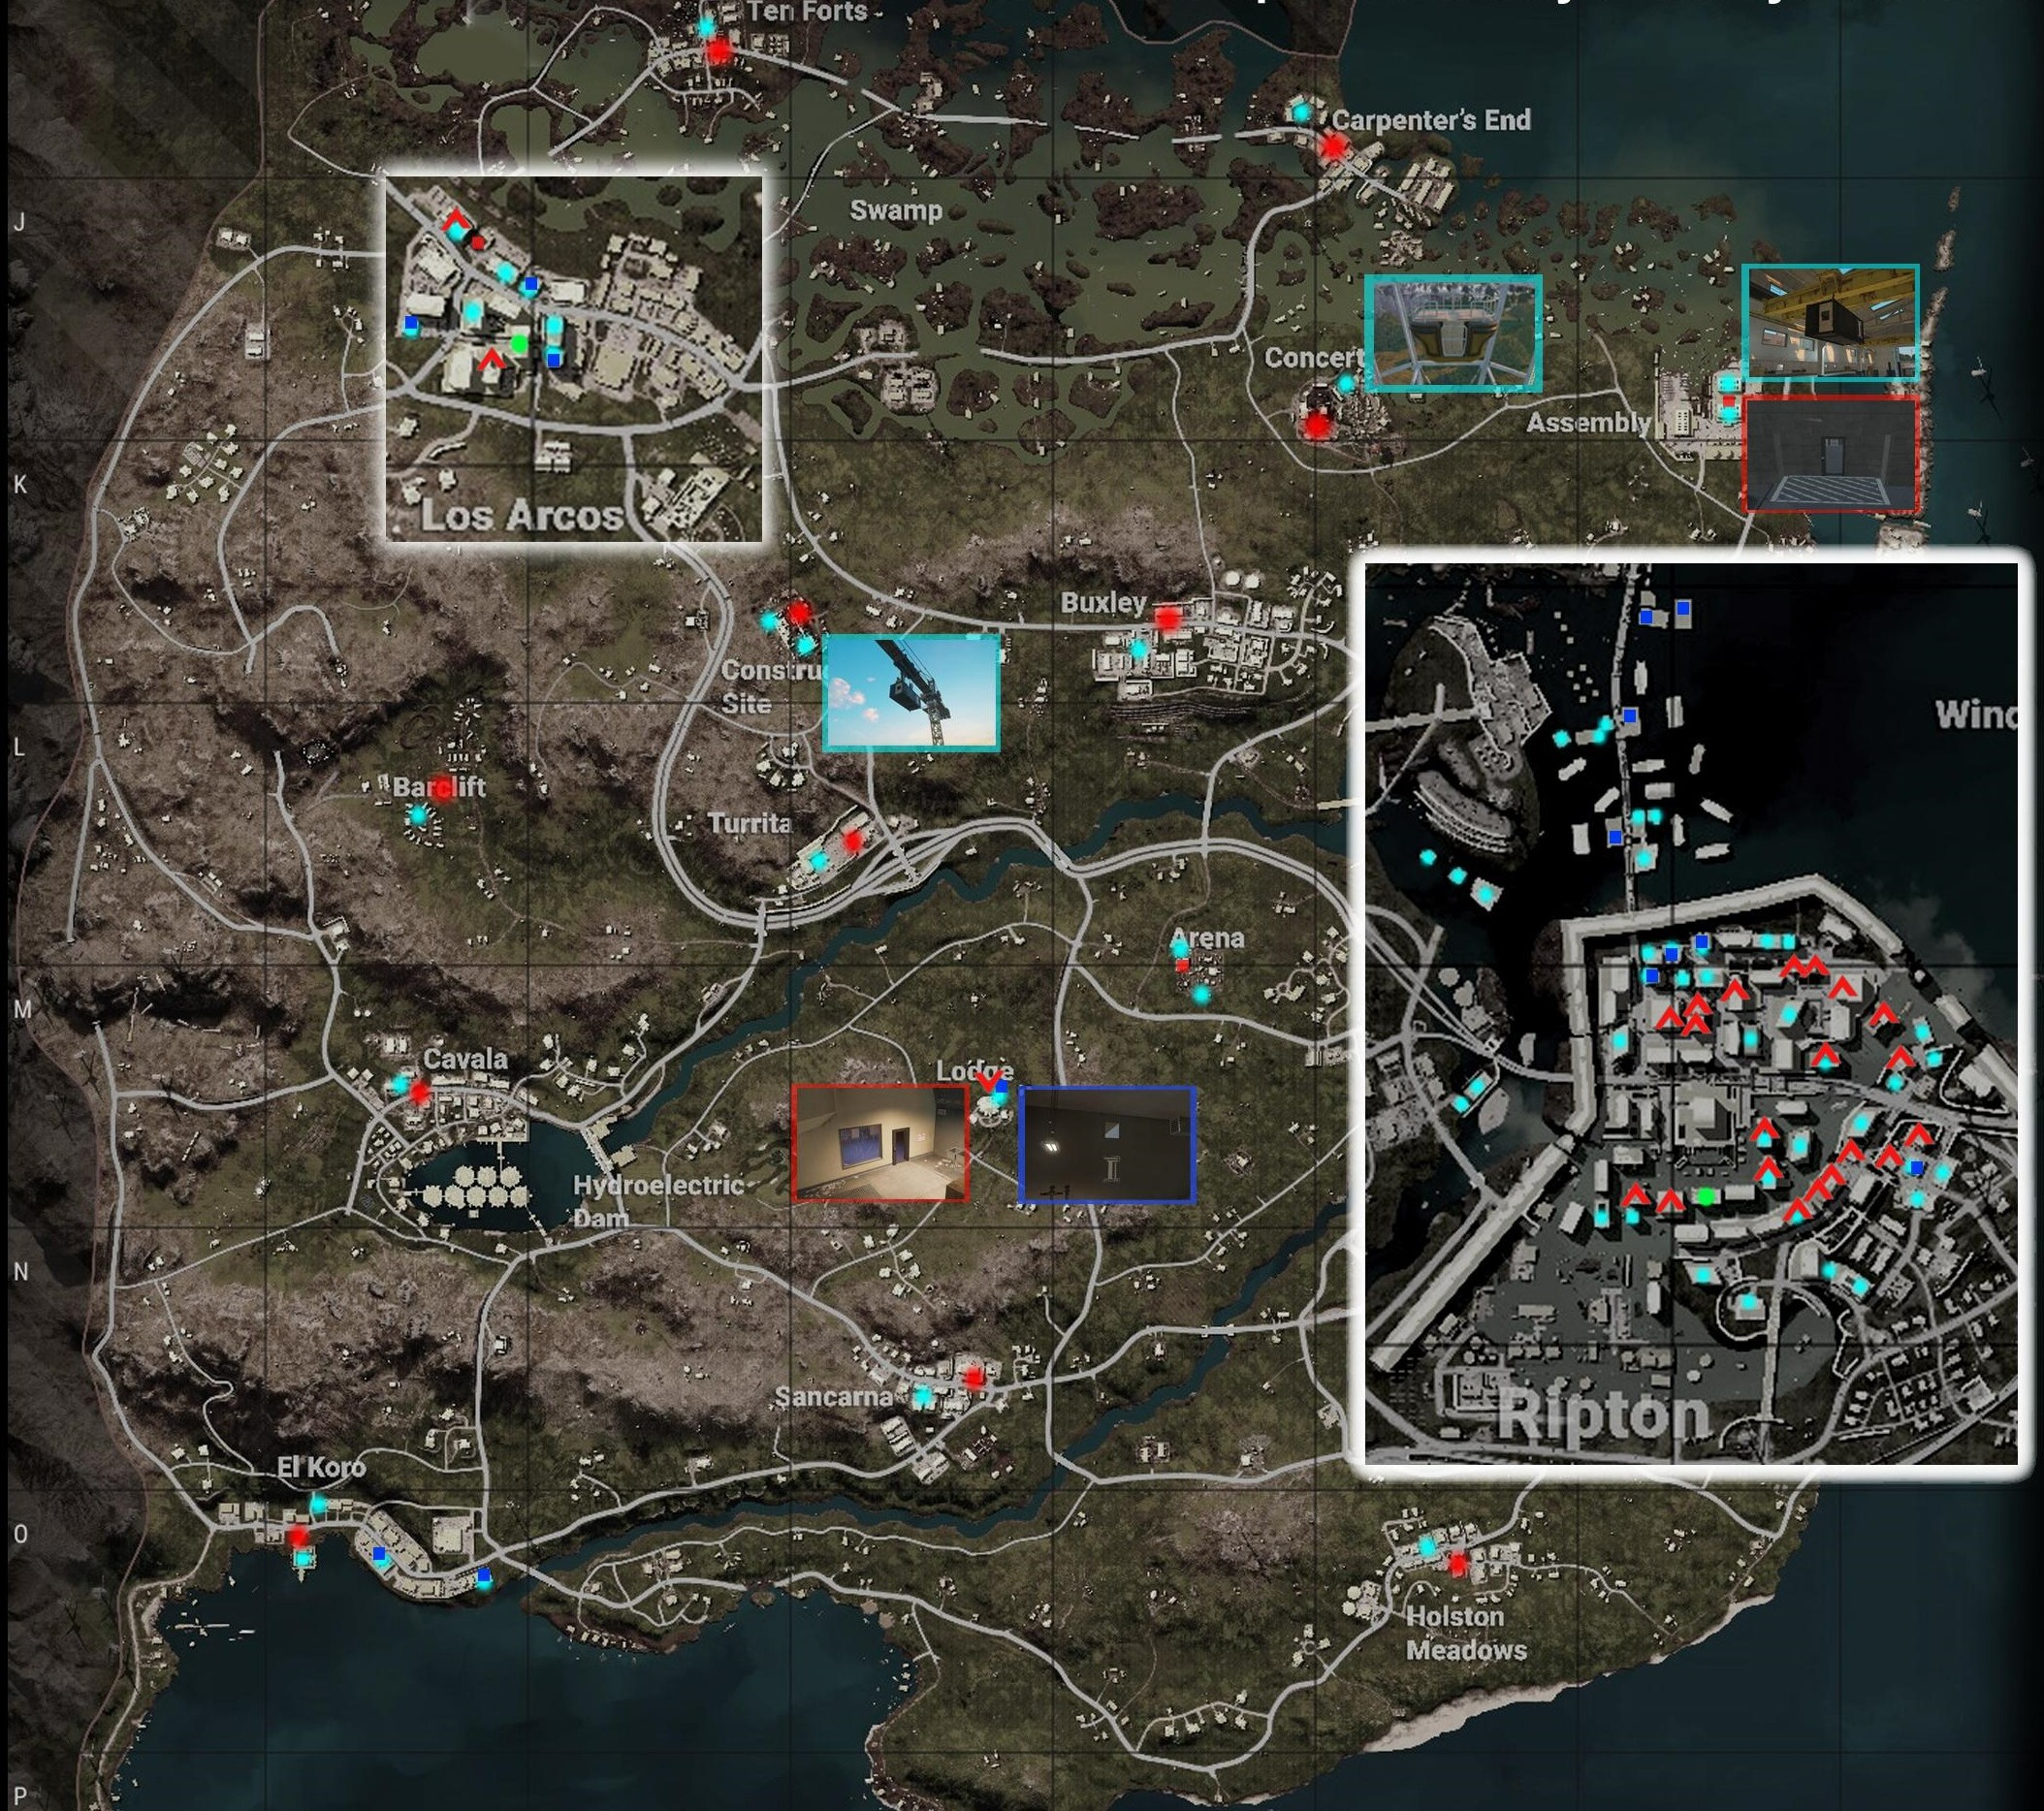 PUBG: BATTLEGROUNDS All Security Keys Map Location Guide - Here is the location of the security keys - B32F494